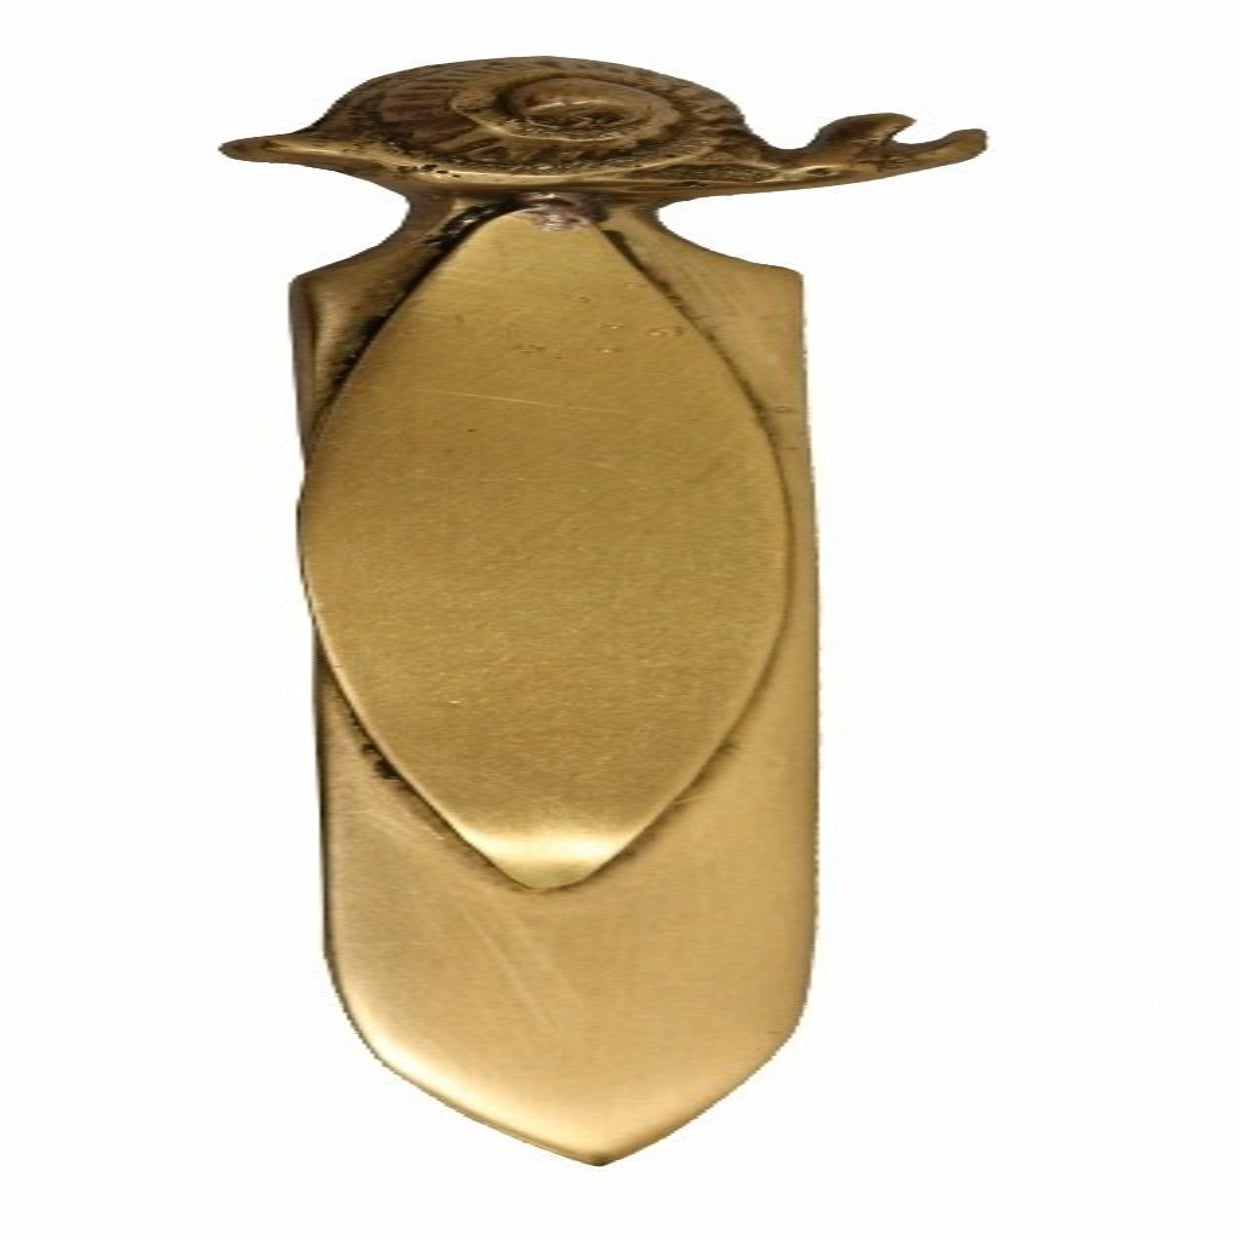 SNAIL BOOKMARK IN BRASS ANTIQUE FINISH